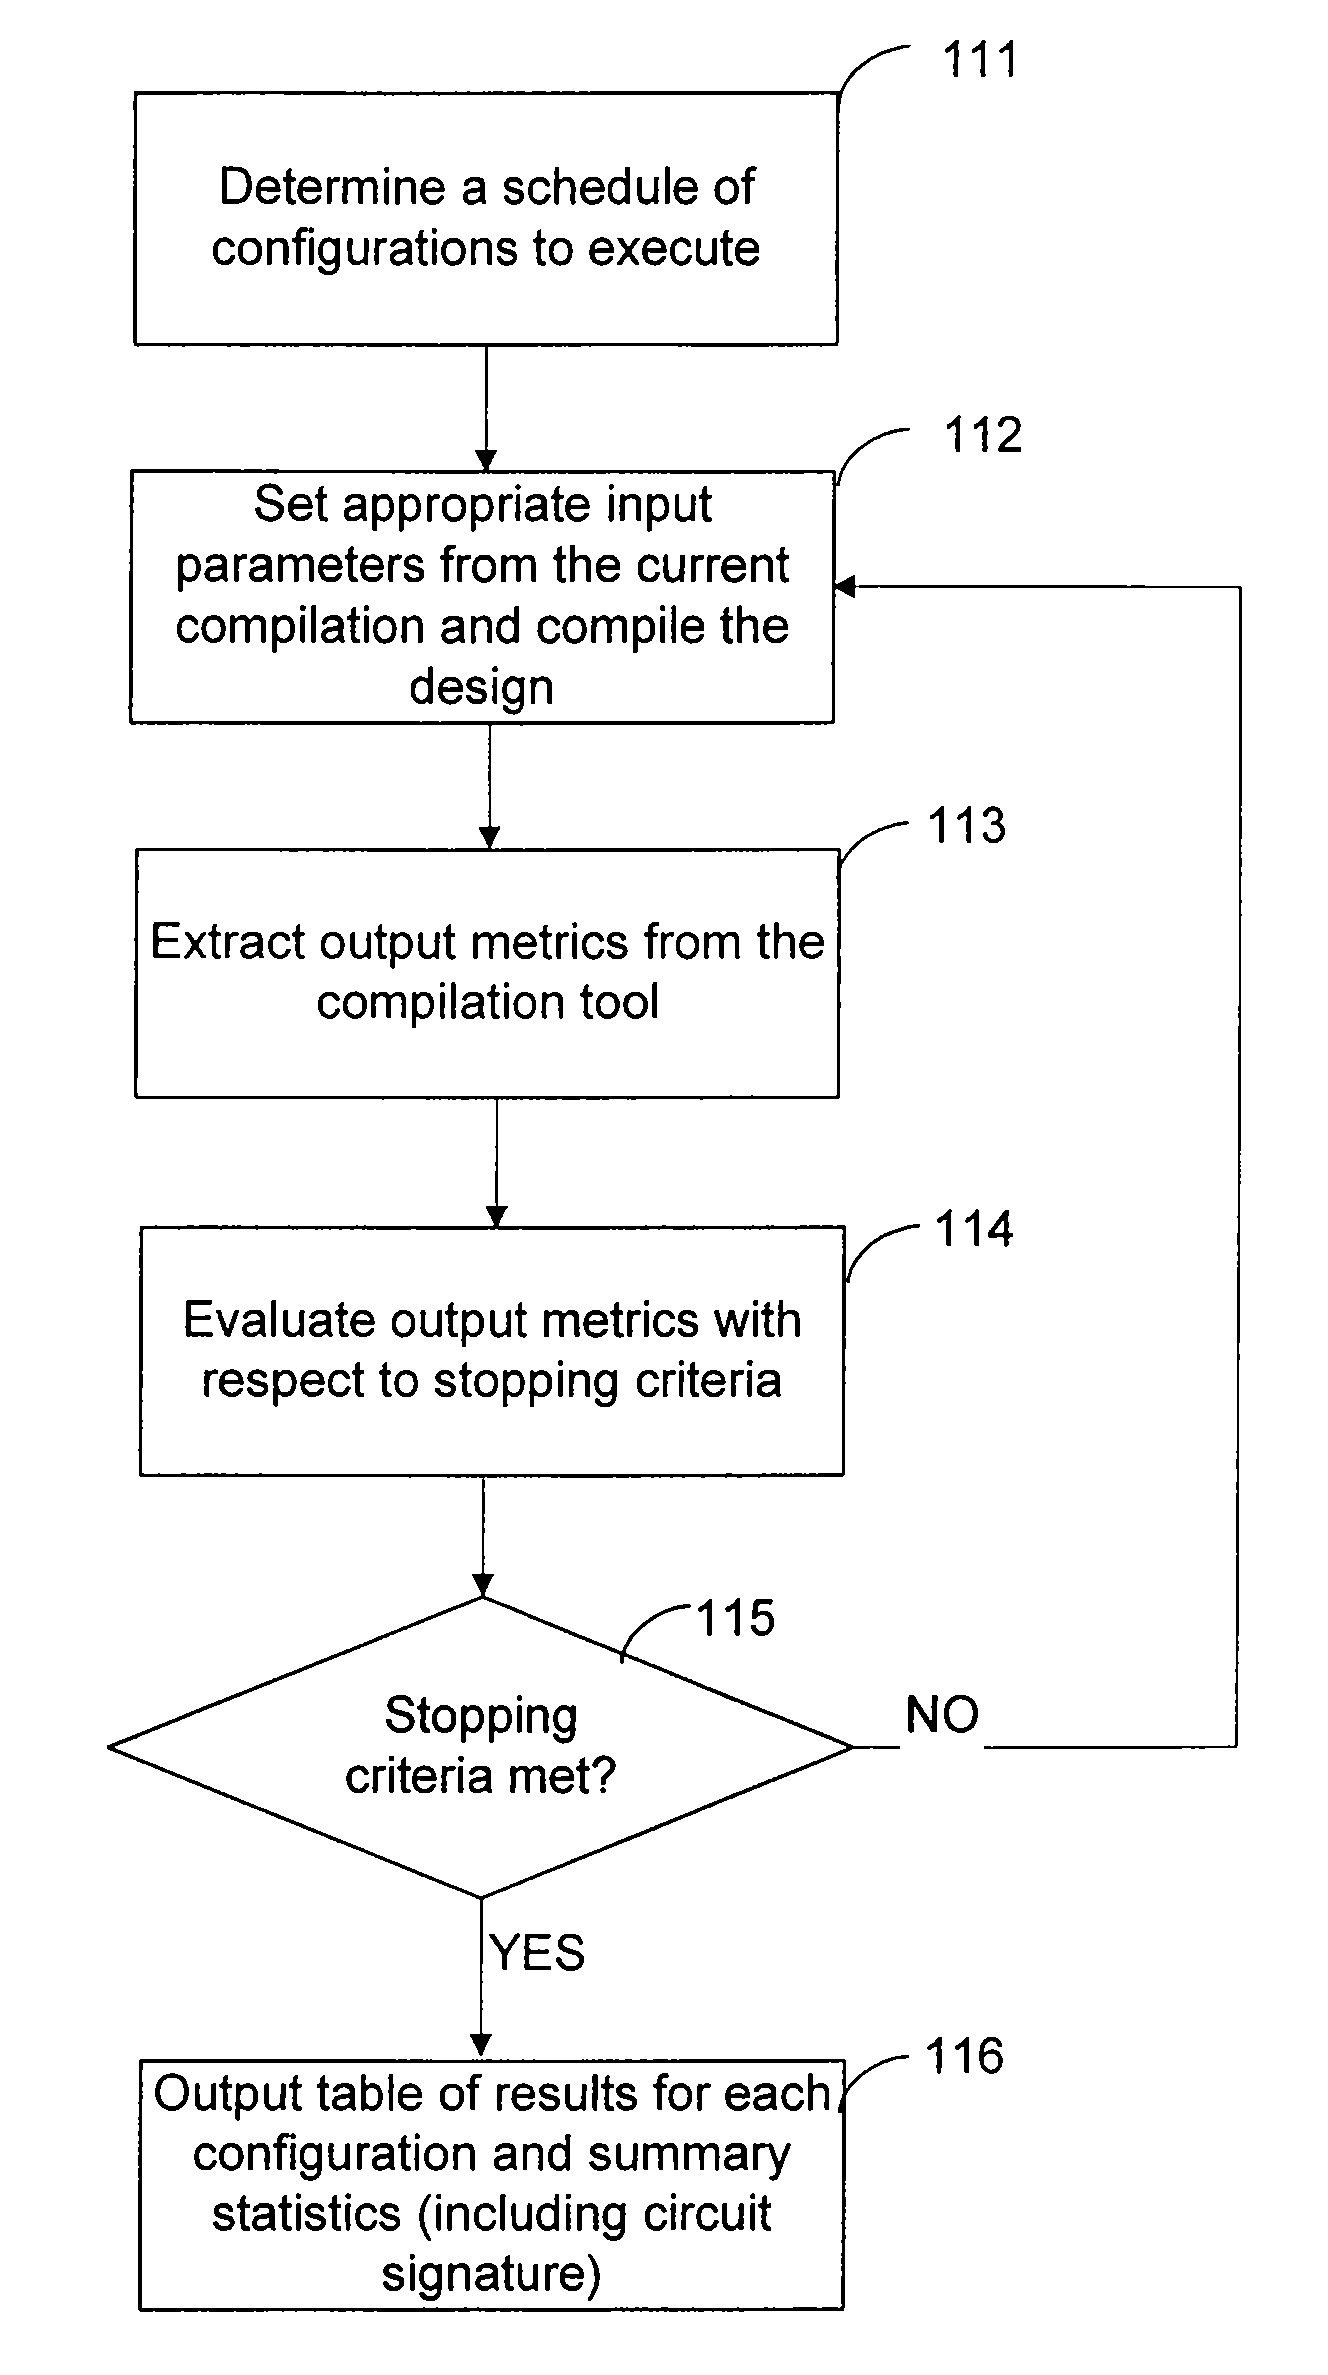 Techniques for automated sweeping of parameters in computer-aided design to achieve optimum performance and resource usage